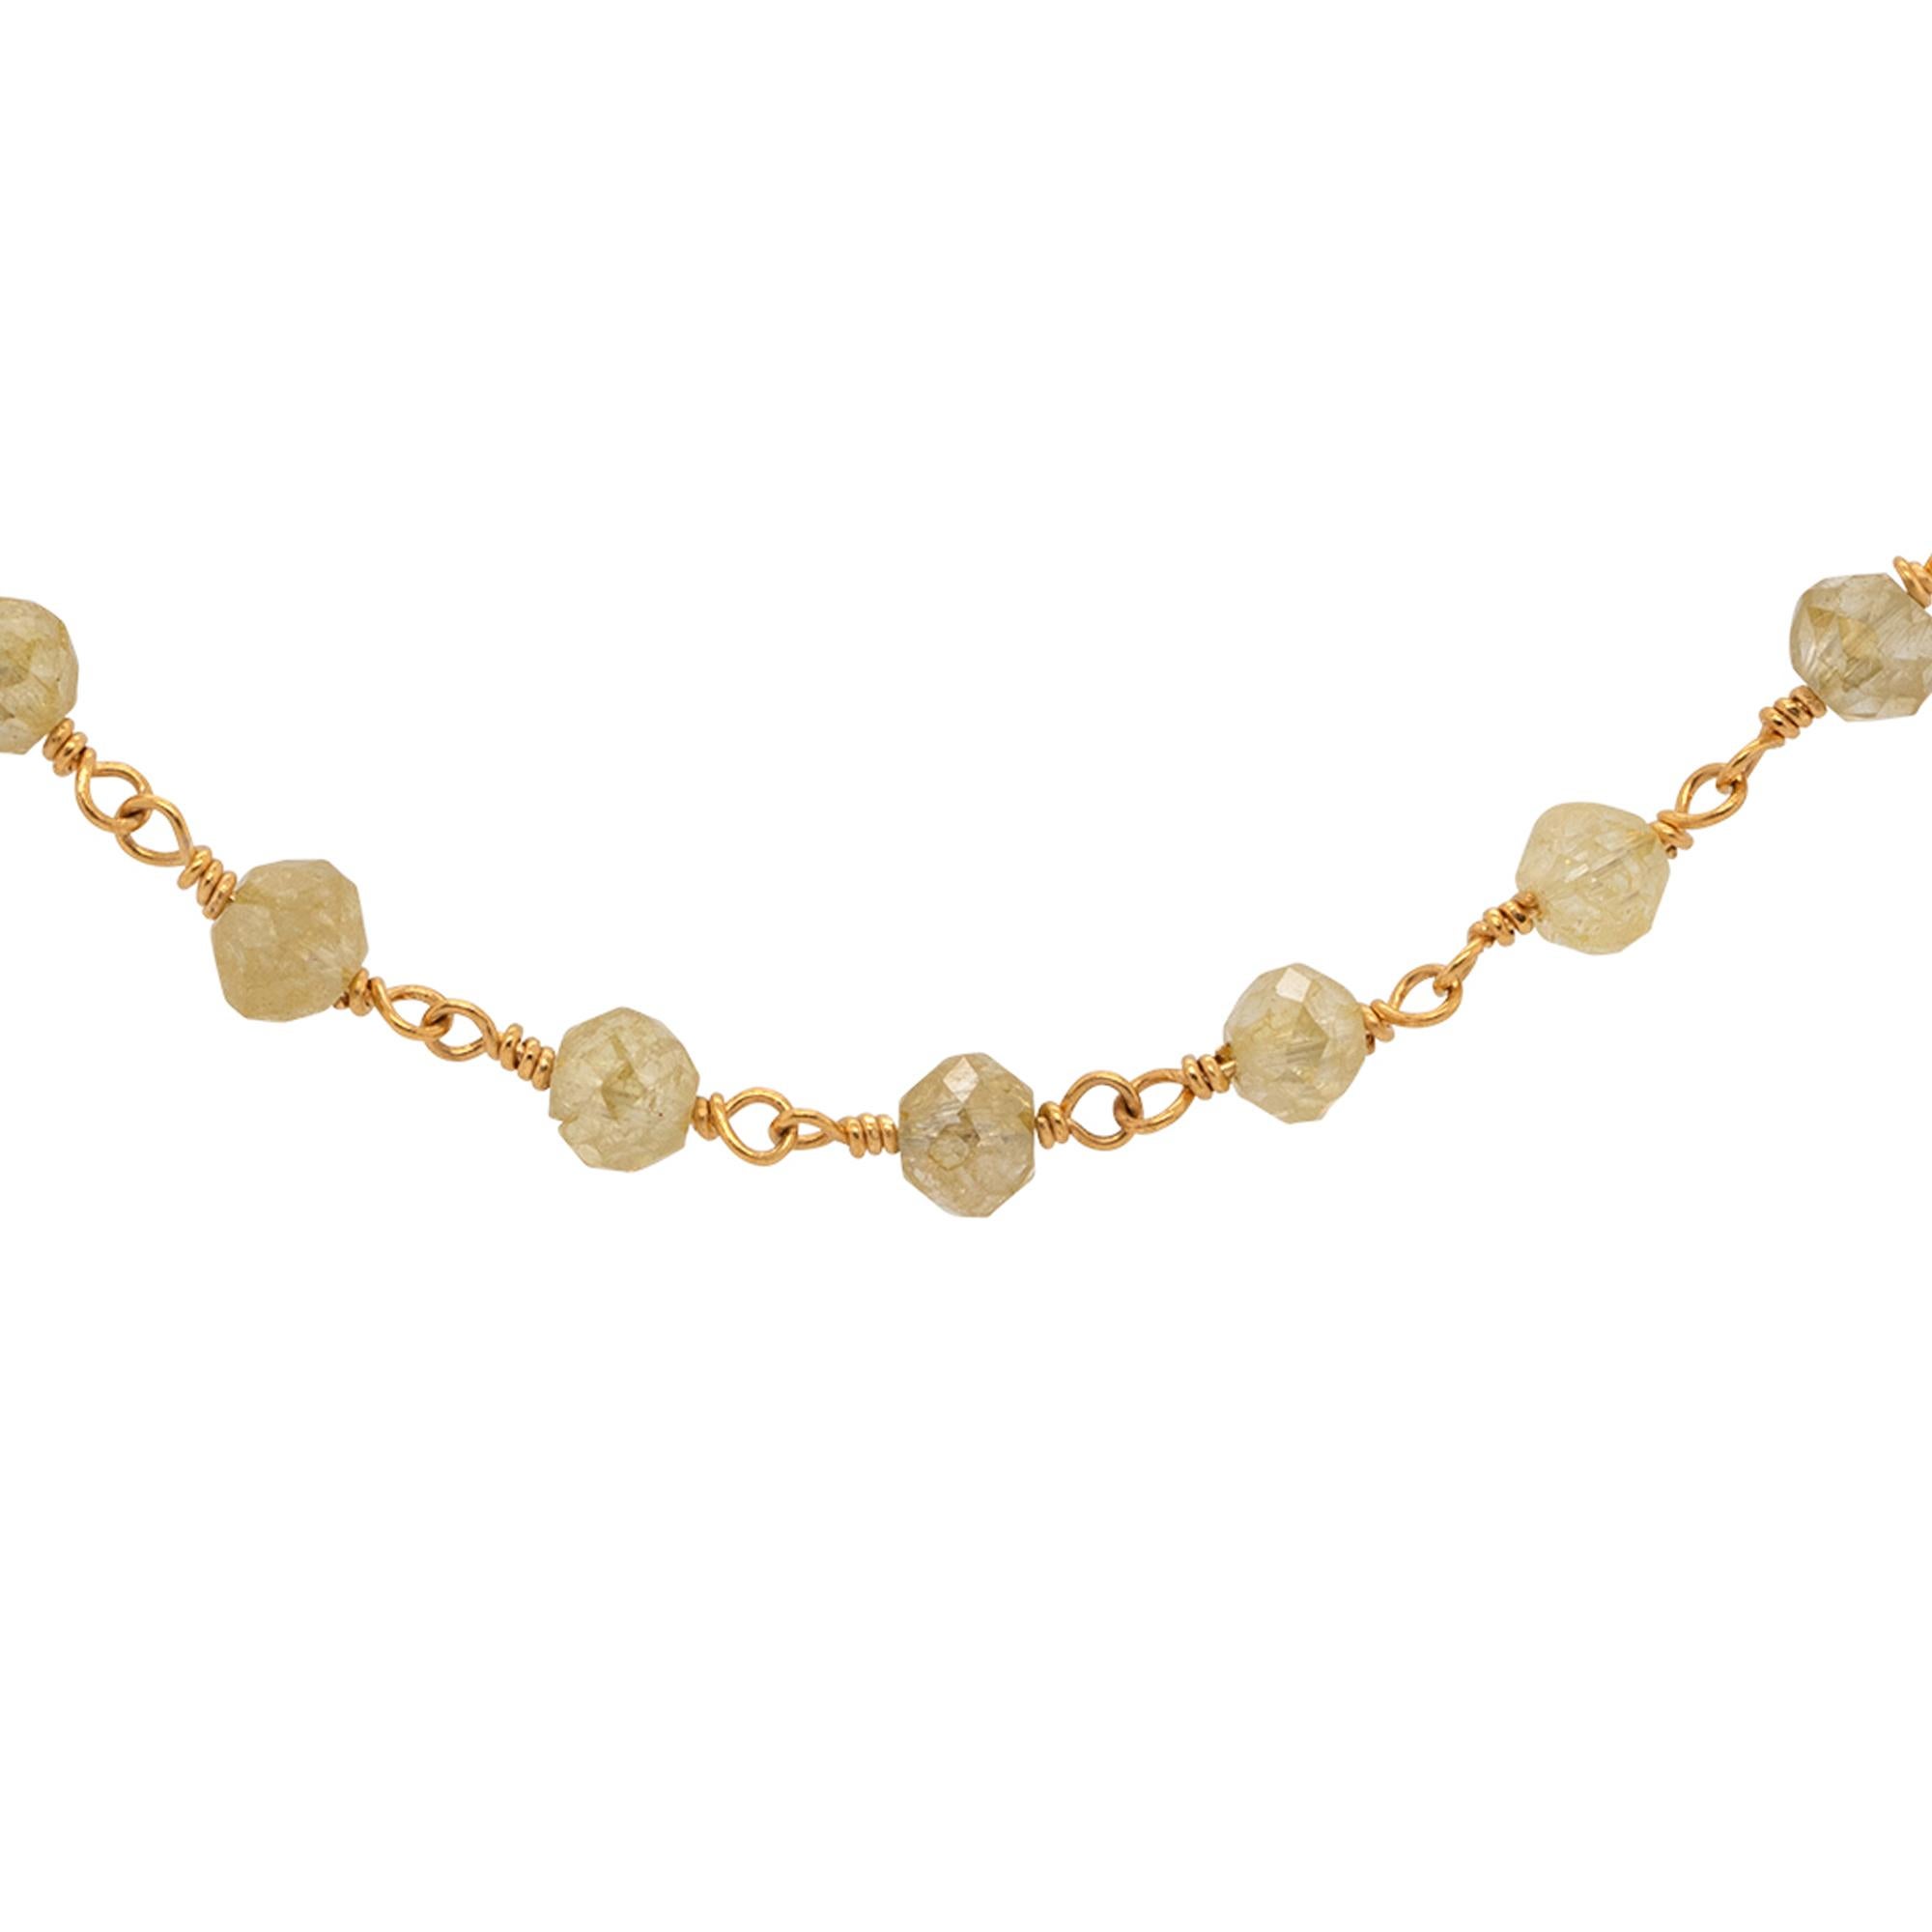 Material: 14k Yellow Gold
Diamond Details: Approx. 7ctw of round cut faceted bead Diamonds. Diamonds are Fancy Yellow in color and VS in clarity
Measurements: 18 inches in length
Weight: 2.6g (1.7dwt)
Additional details: Item comes complete with a